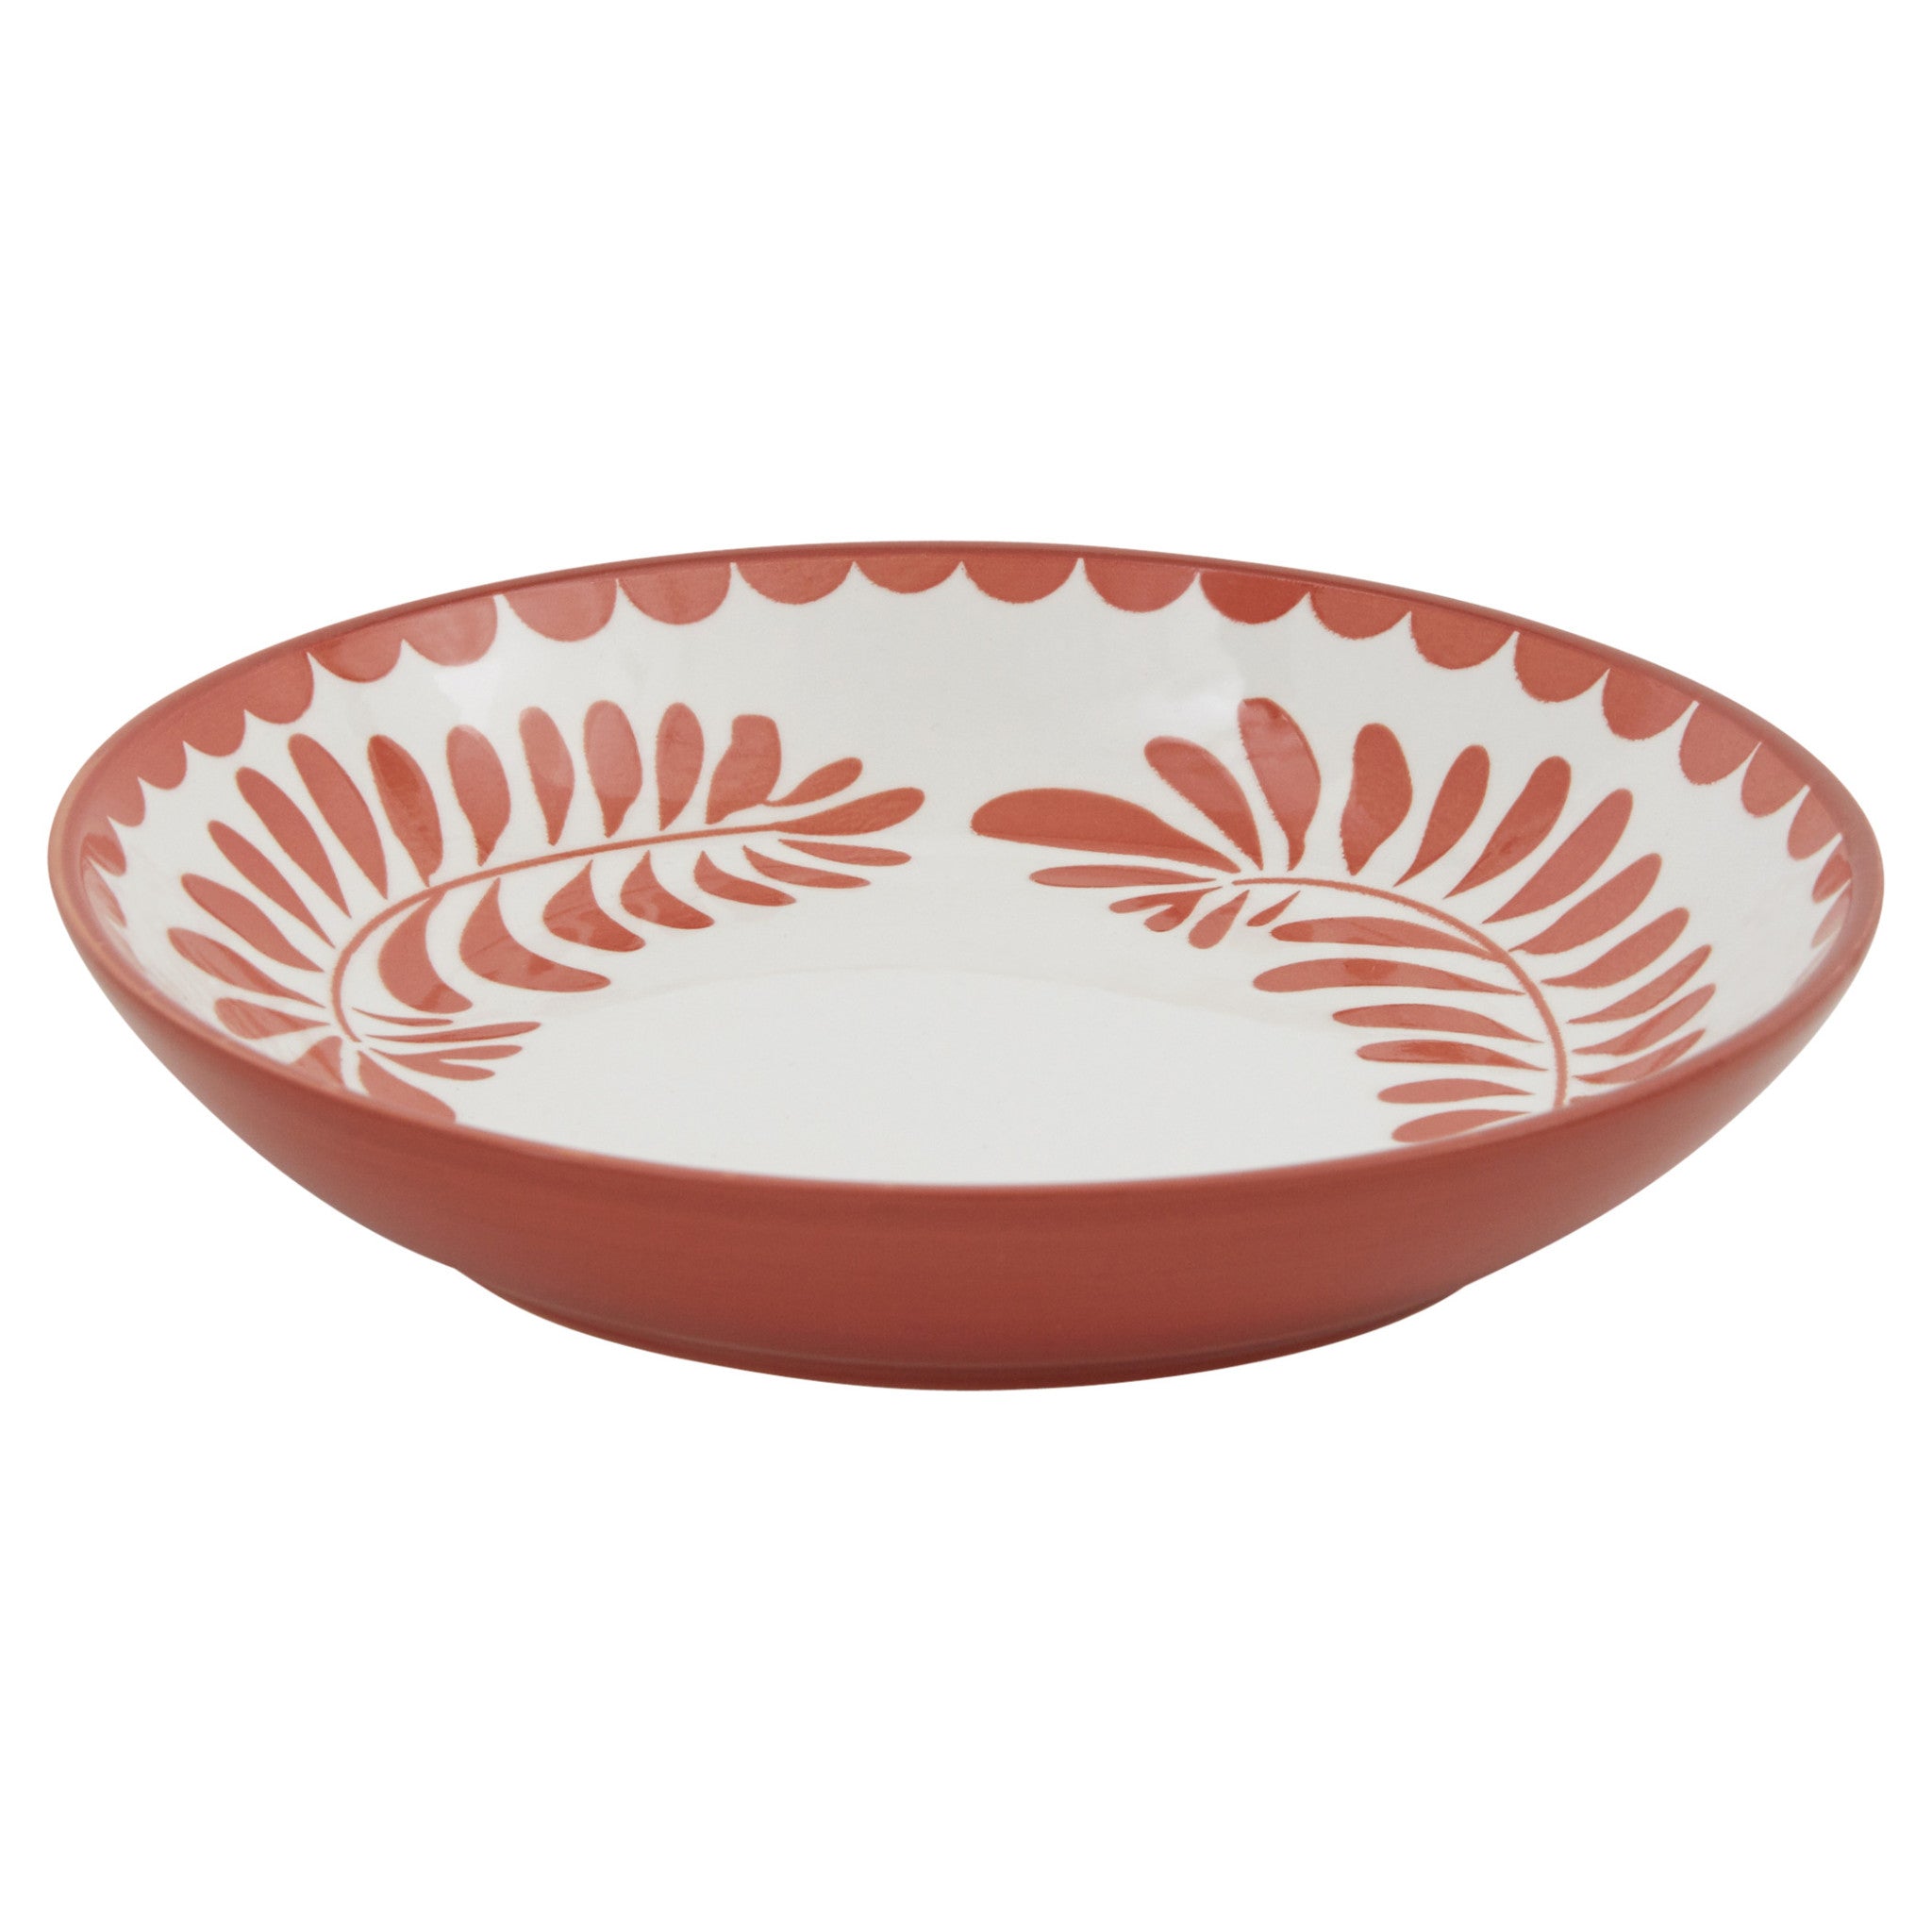 Orange and White Sixteen Piece Round Leaves Ceramic Service For Four Dinnerware Set - Tuesday Morning-Dinnerware